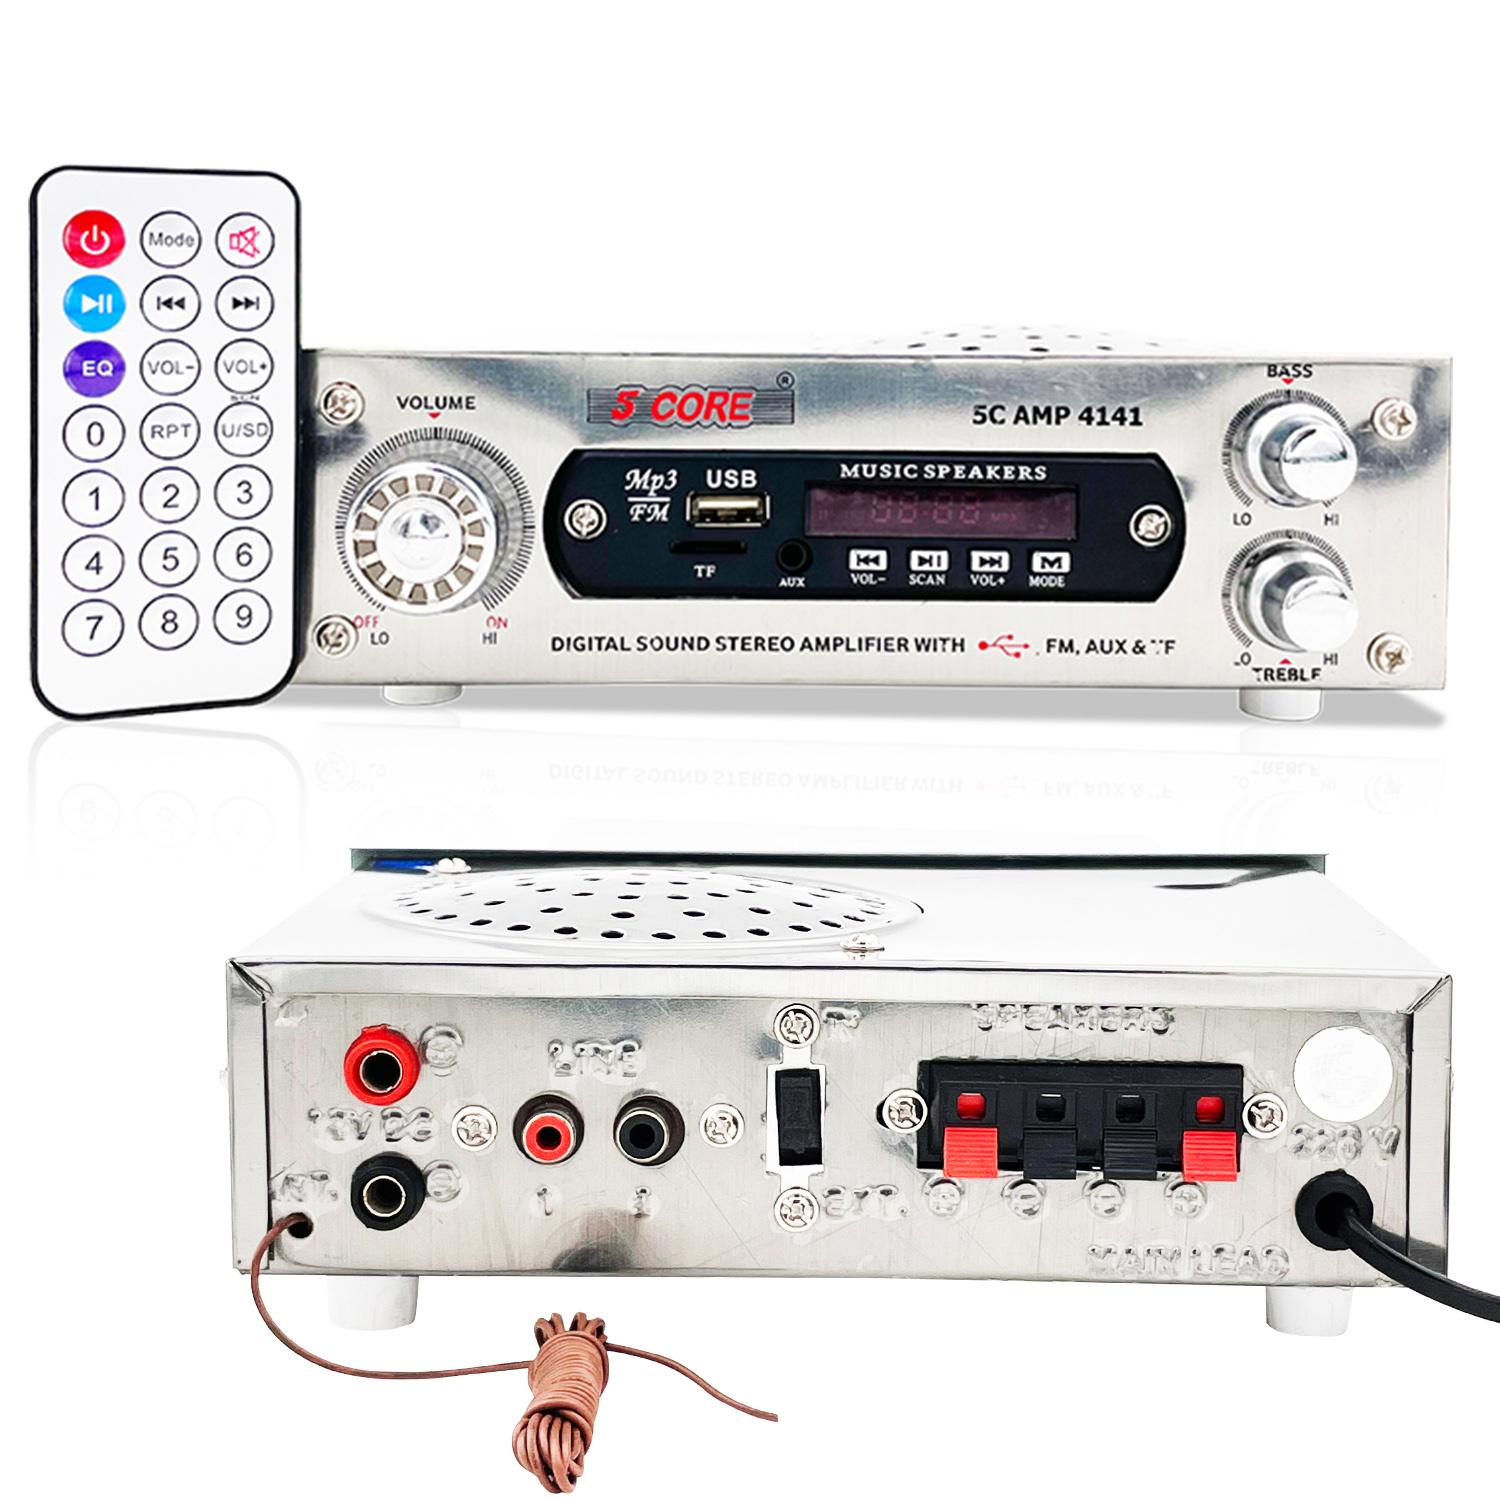 Stereo amplifier with remote control and various inputs.